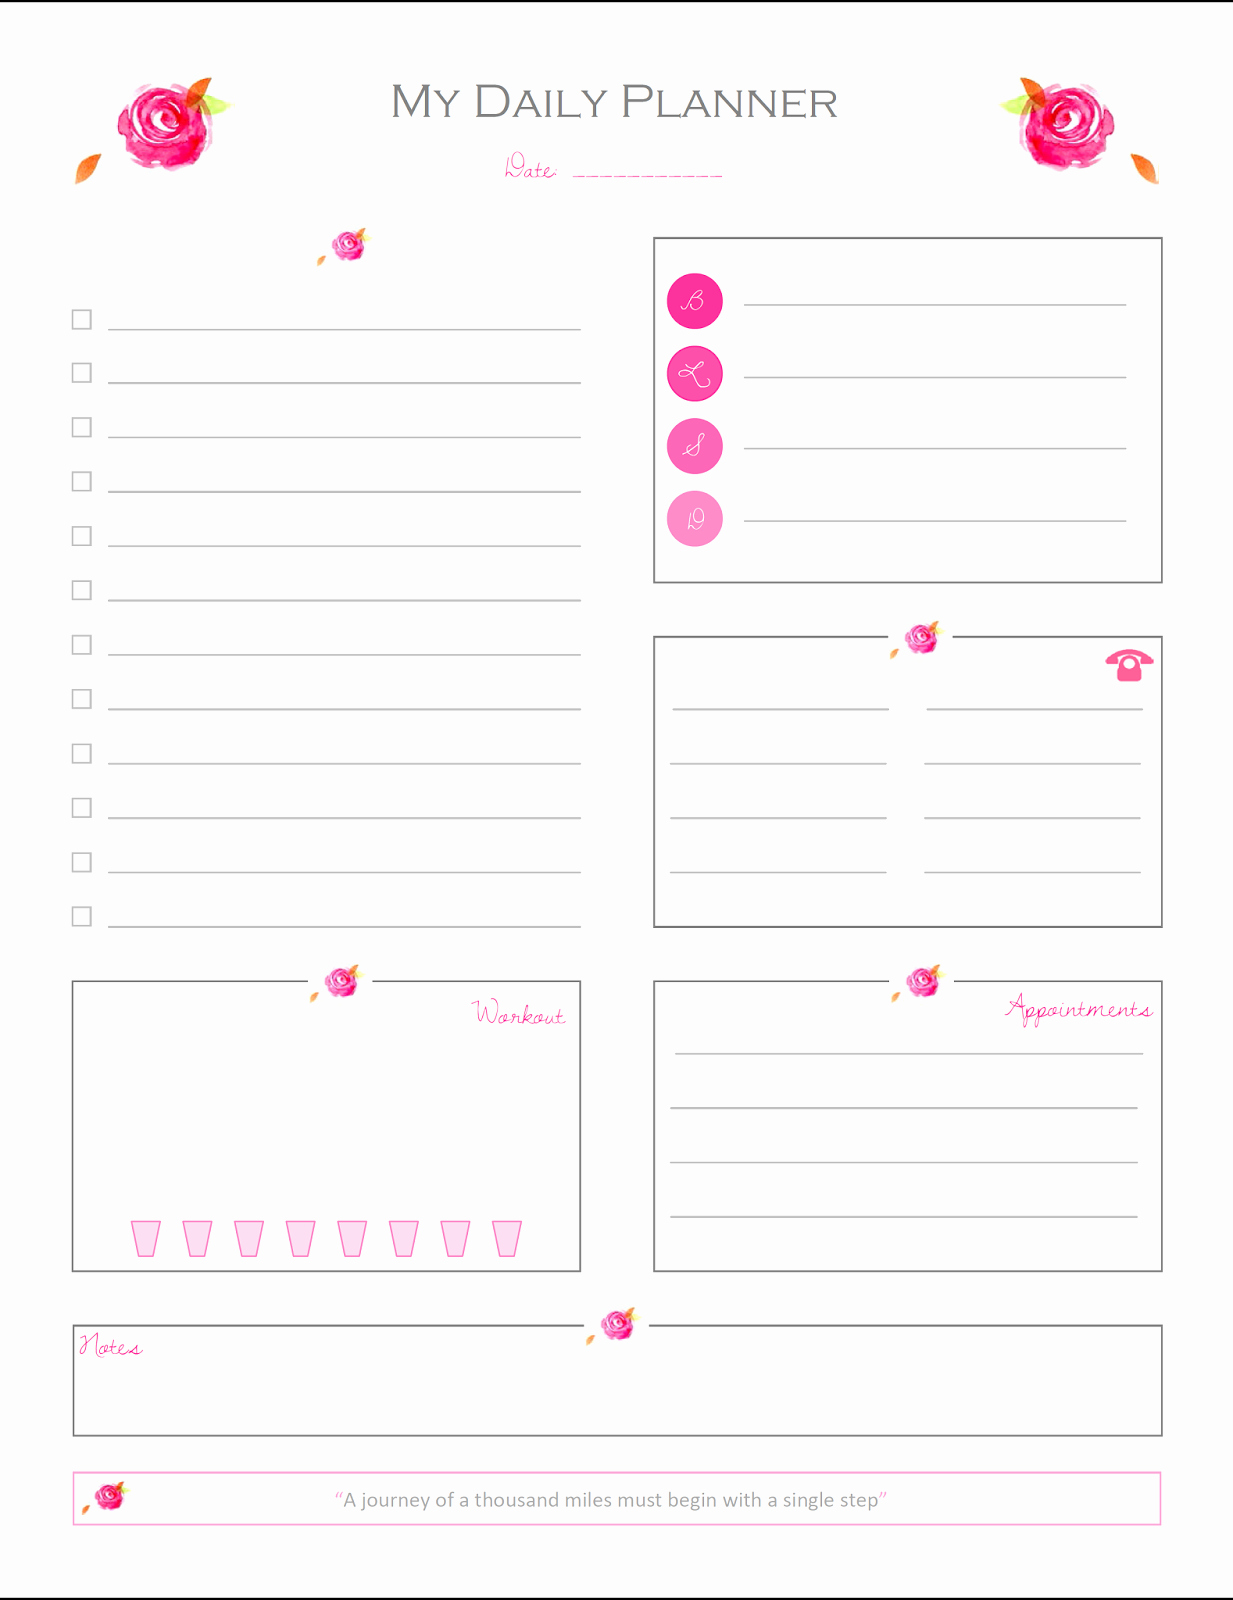 Daily Planner Printable Pdf Best Of Made In Craftadise